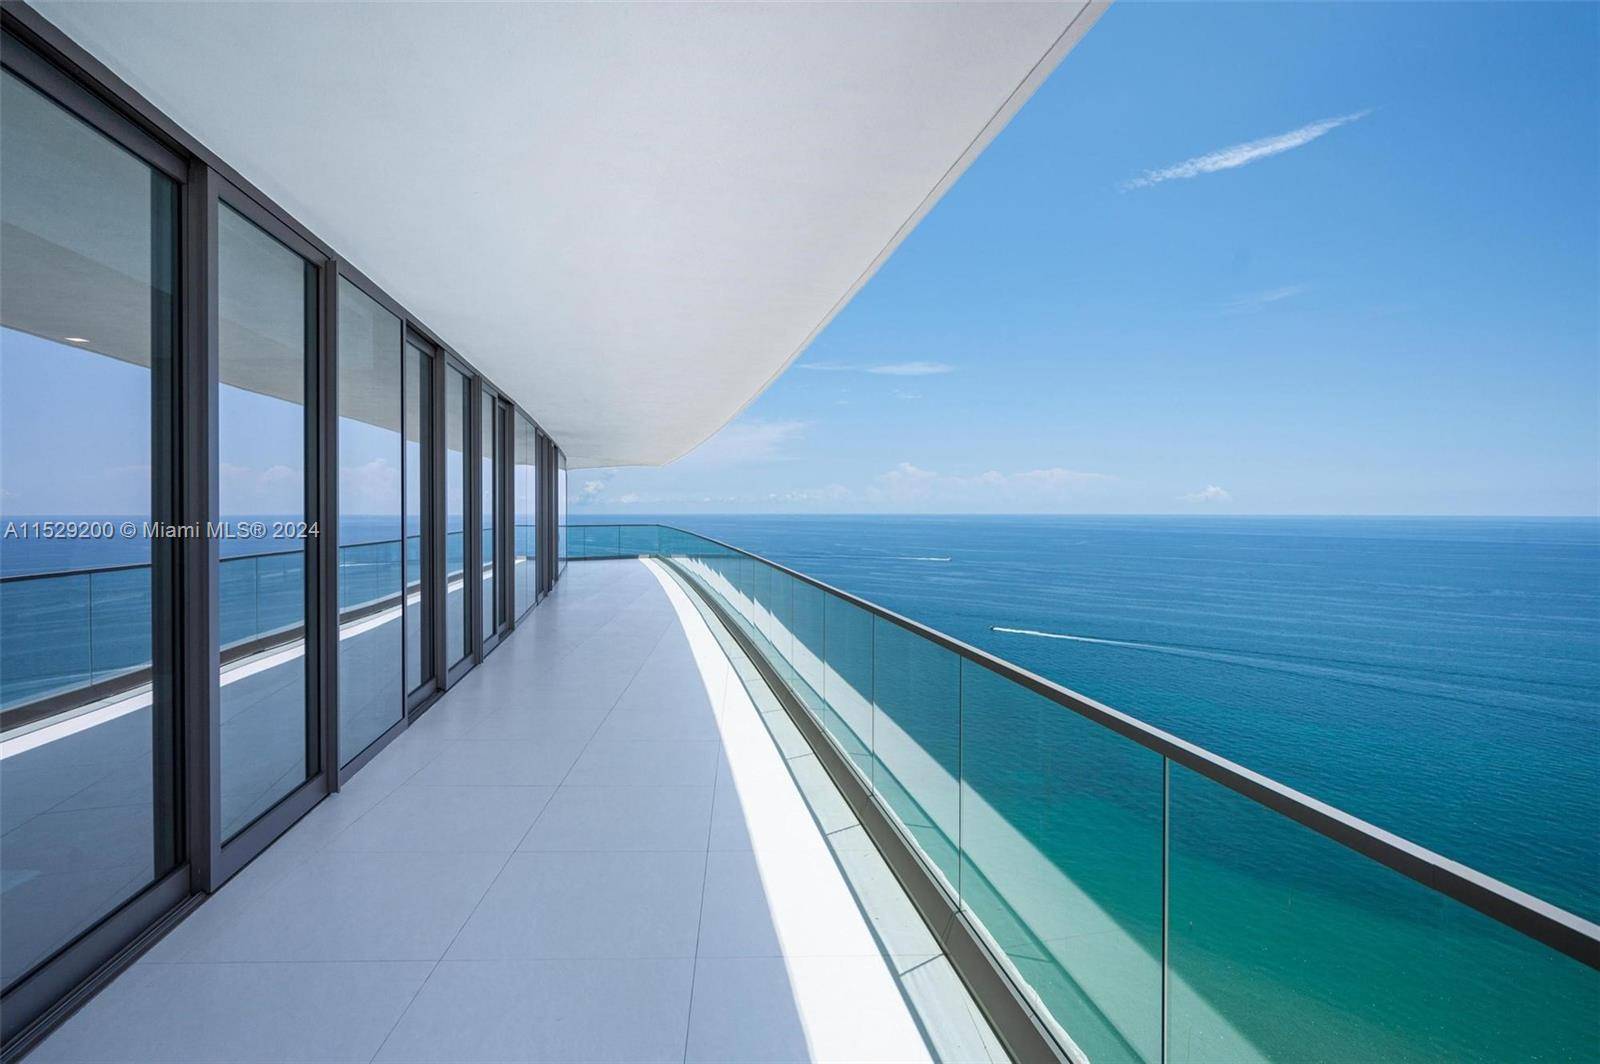 Turnkey 4bed 5 1 2 bath stunning residences bring only your toothbrush, Best line with 150ft terrace with endless ocean coastline views North to South, STEP INTO ARMANI, ONE OF ...